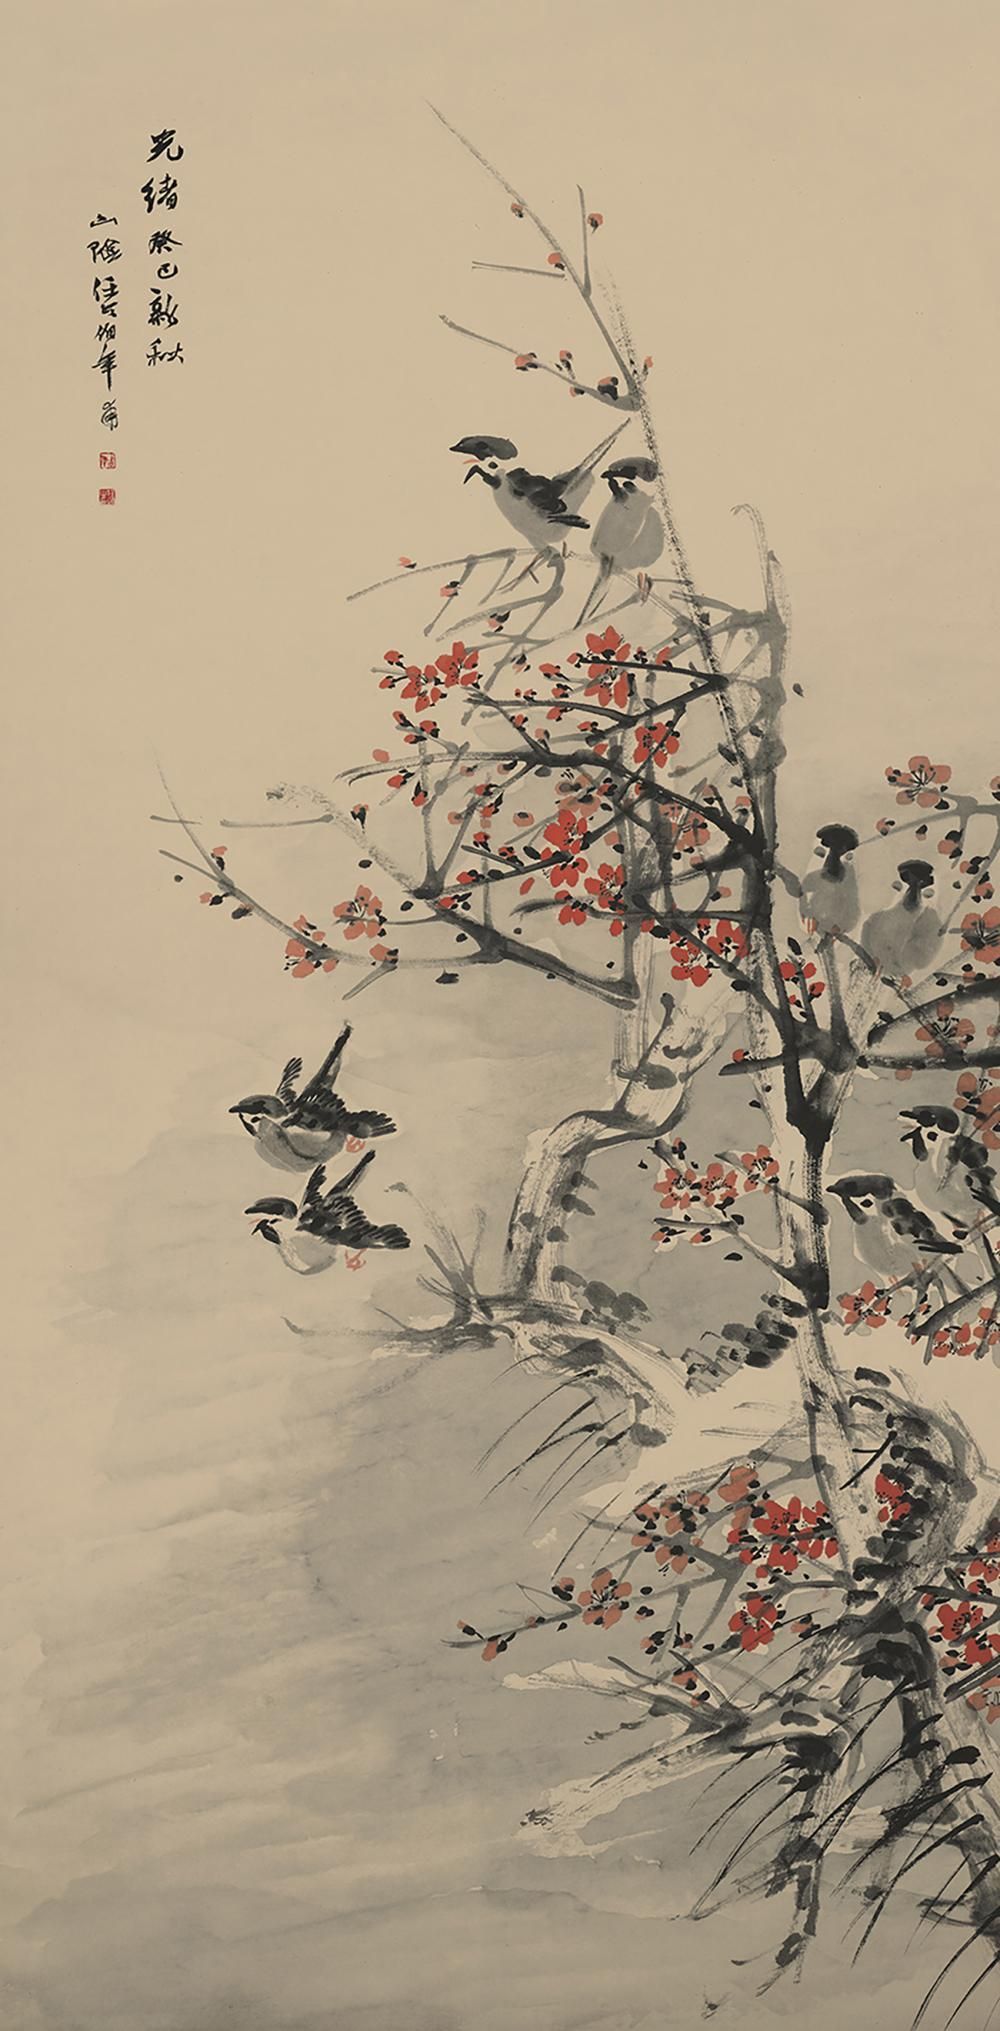 A Chinese Painting. Art wallpaper iphone, Japanese art, Japanese painting